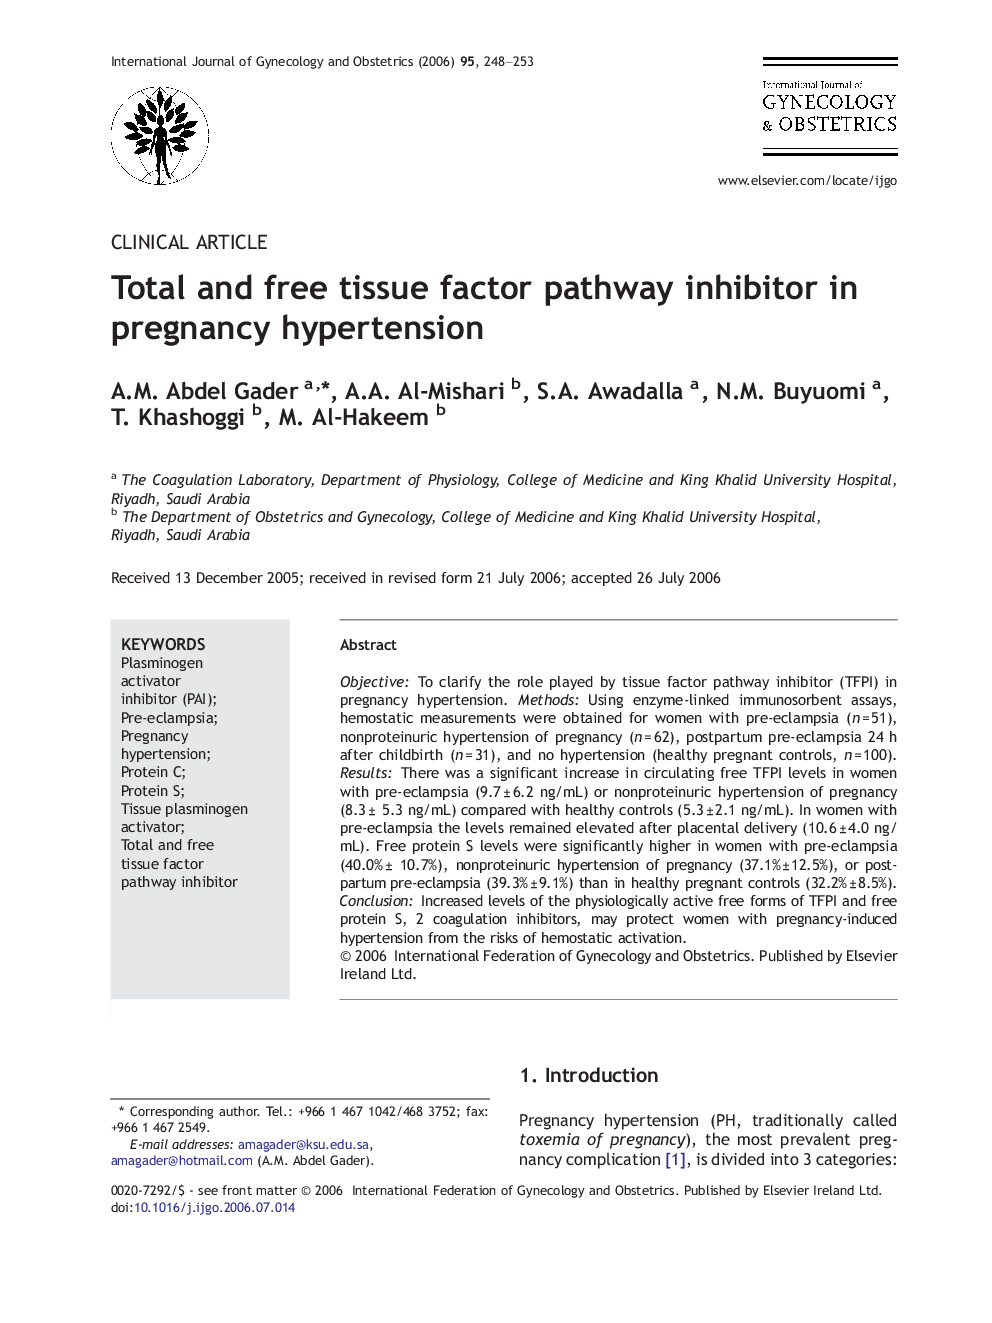 Total and free tissue factor pathway inhibitor in pregnancy hypertension